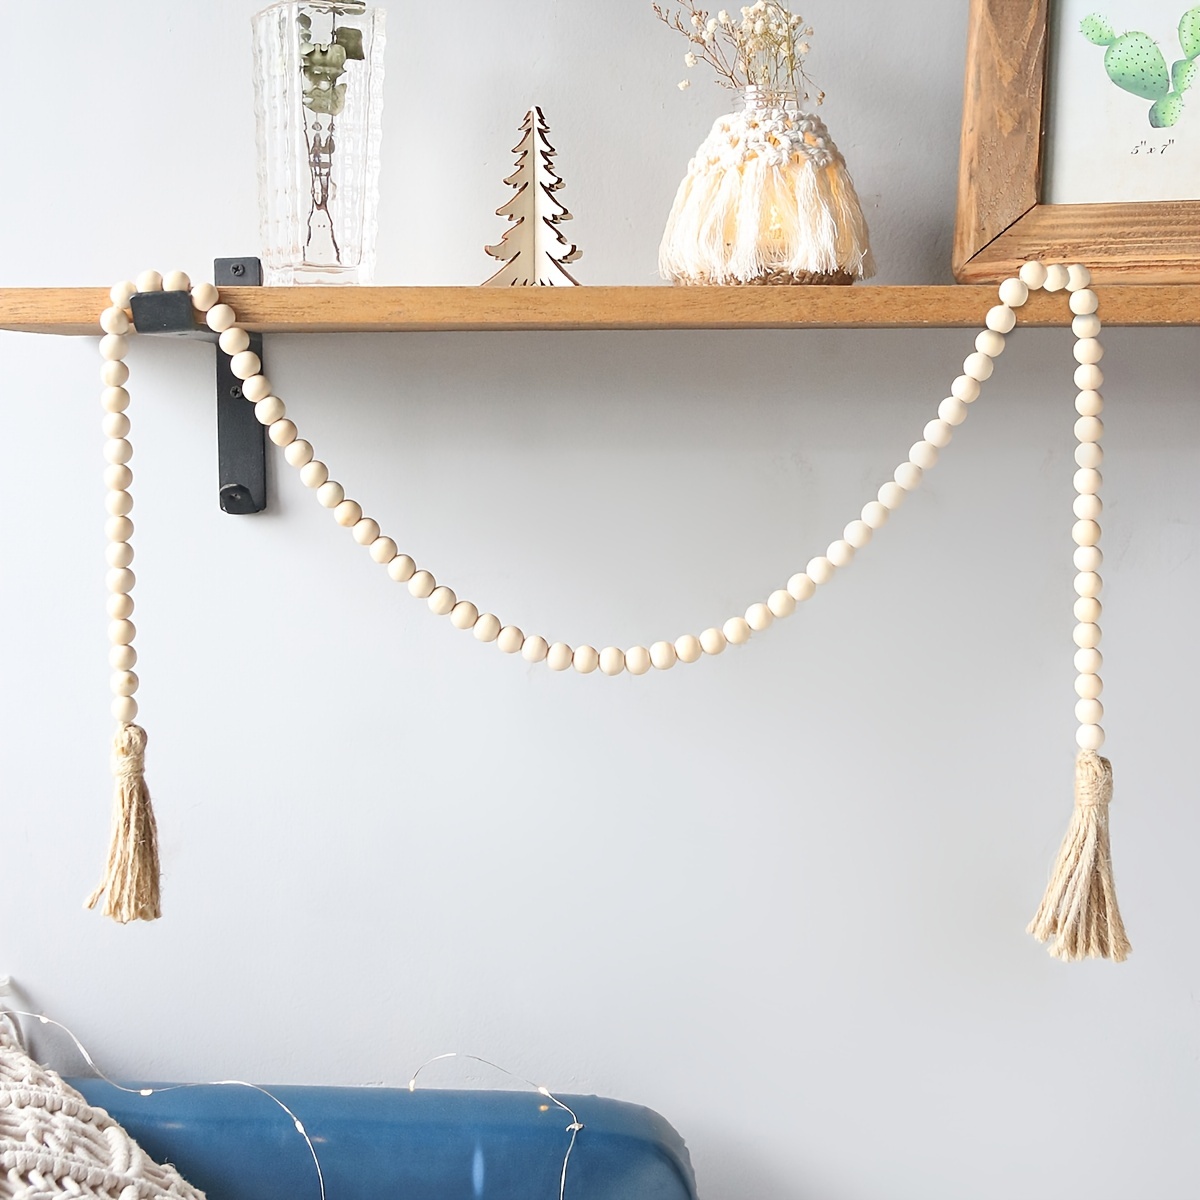 DIY Wall Hanging Decor Made With Wooden Beads